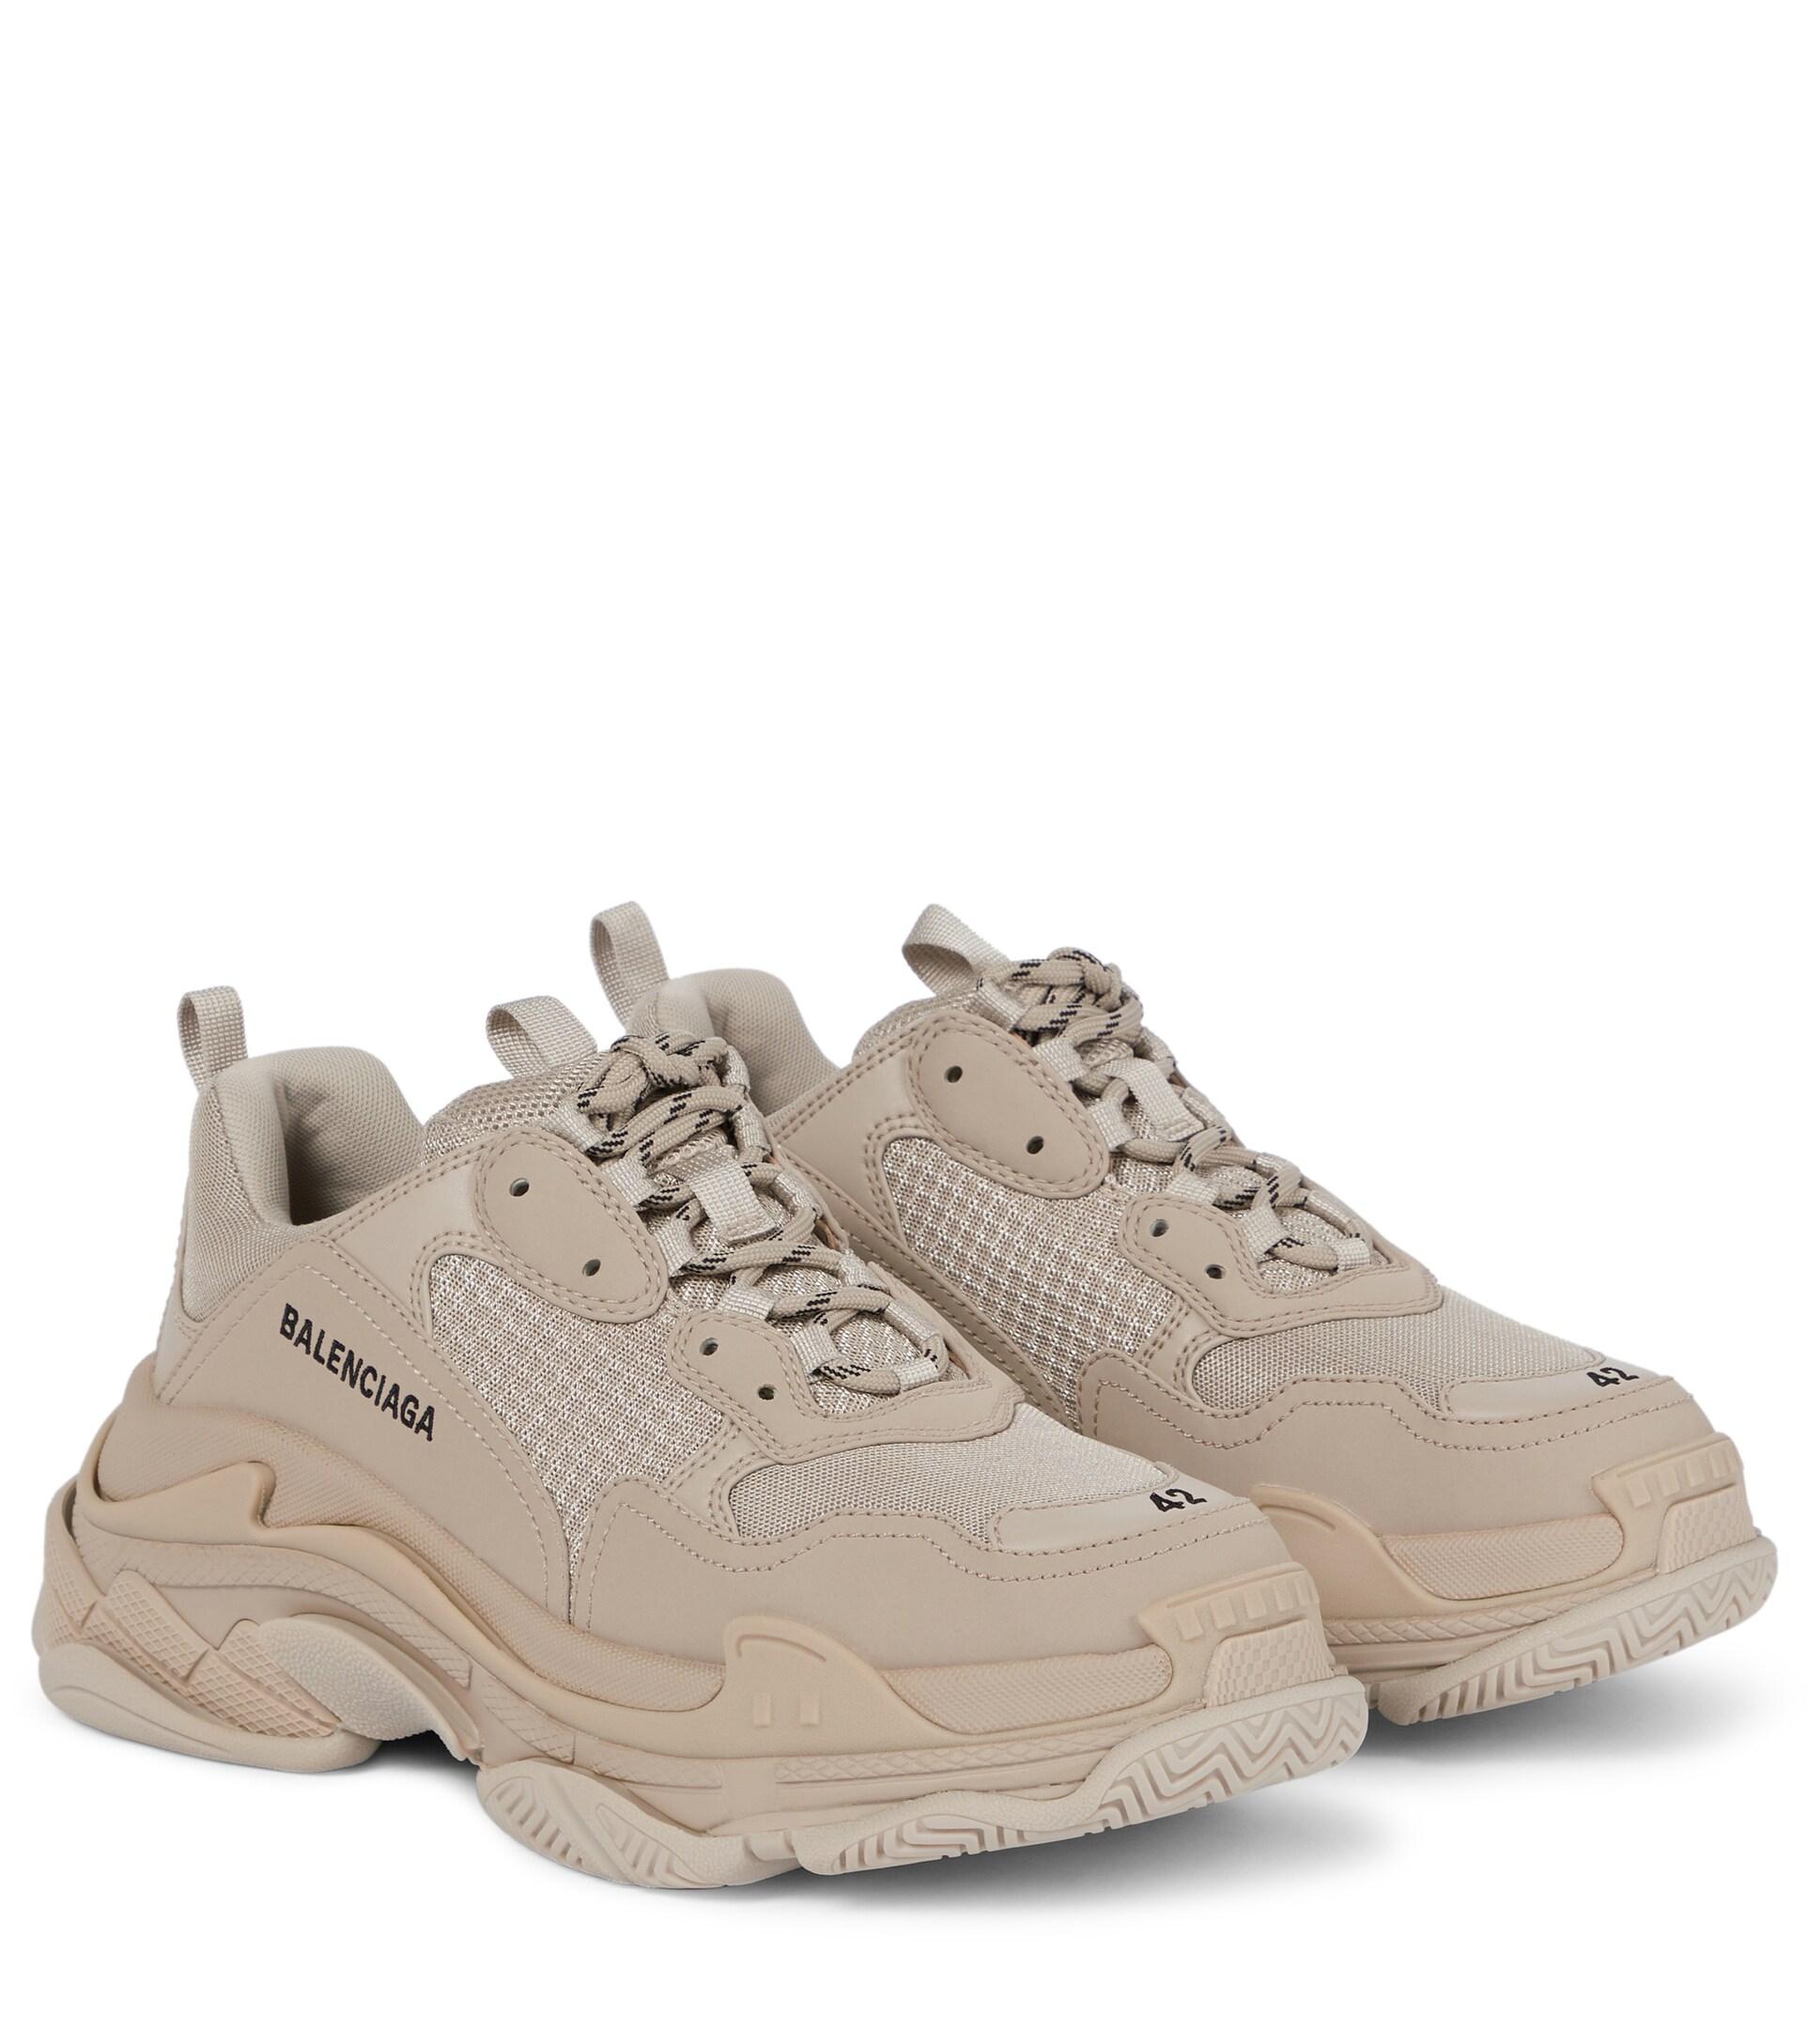 Balenciaga Triple S Sneakers in Beige (Natural) | Lyst